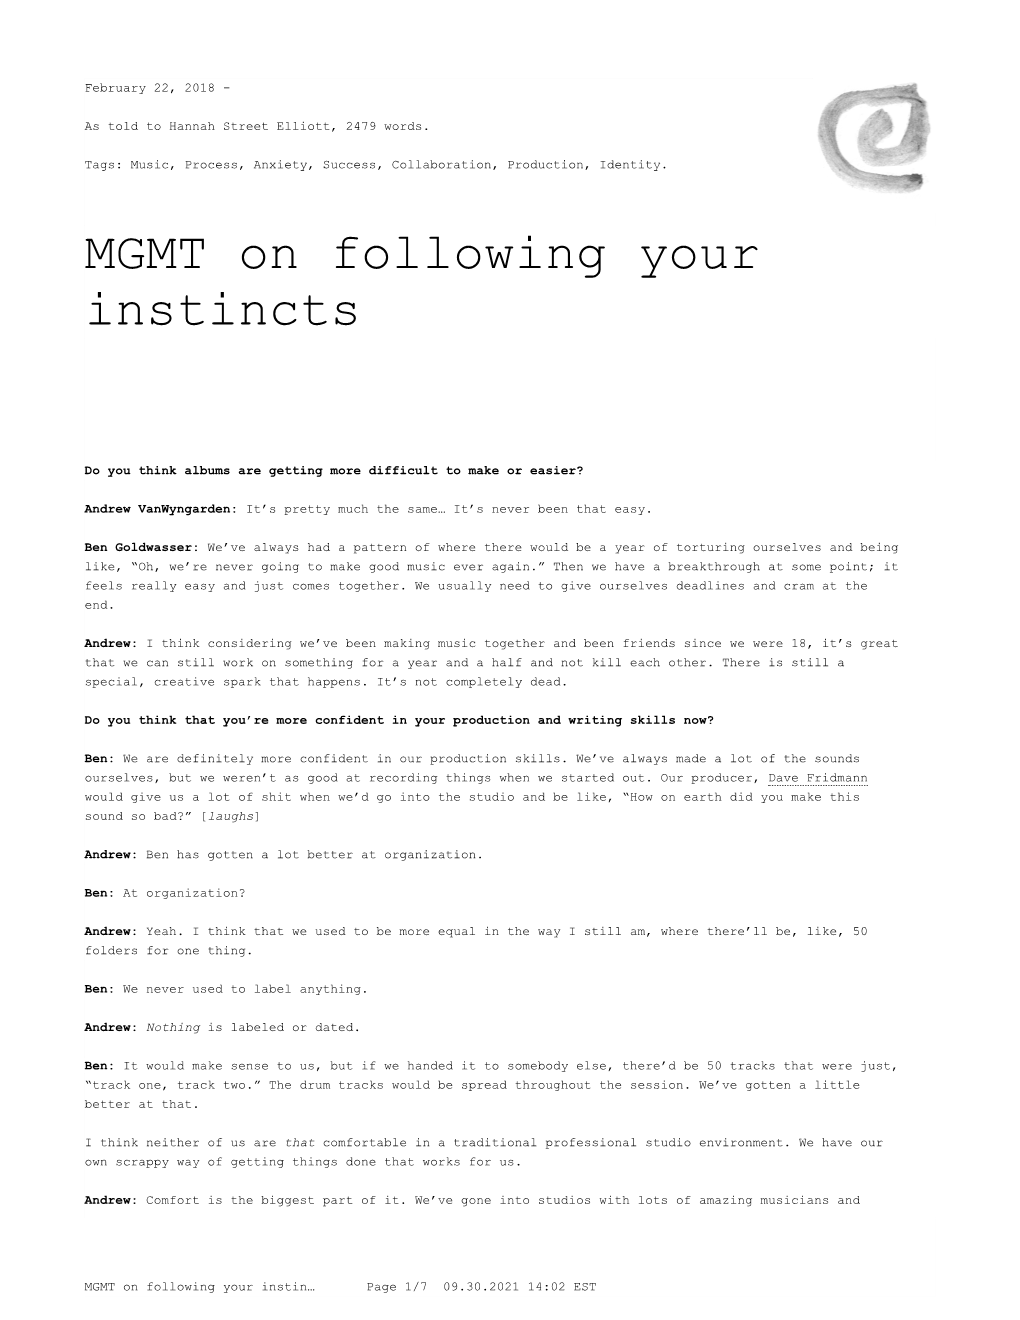 MGMT on Following Your Instincts